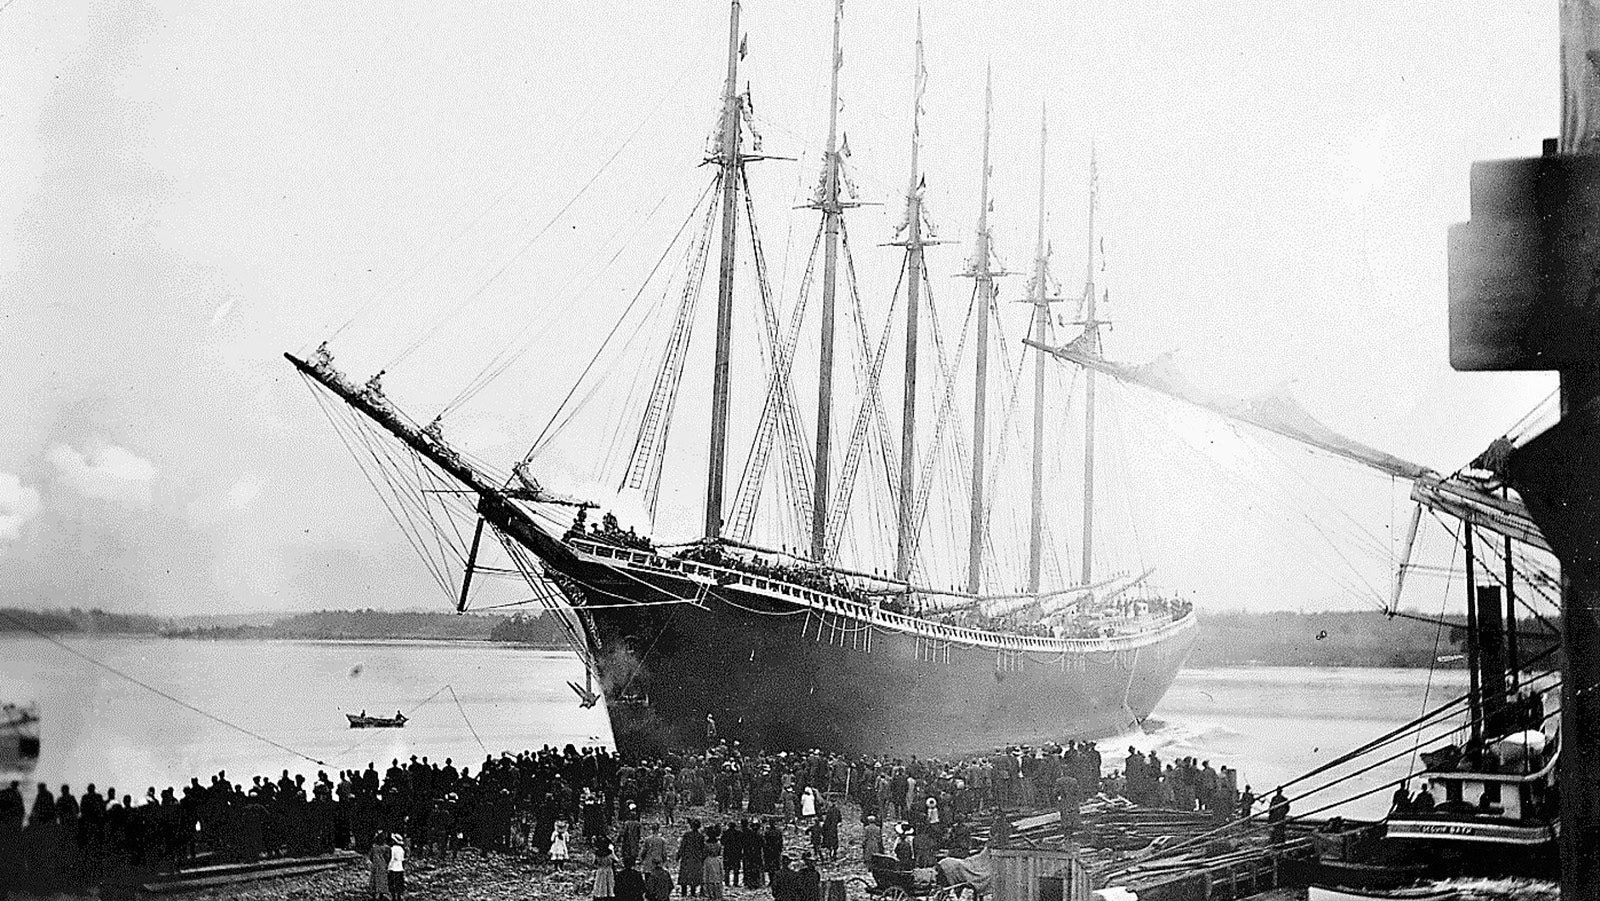 People gather on the dock as the Wyoming prepares to launch in this undated photo.